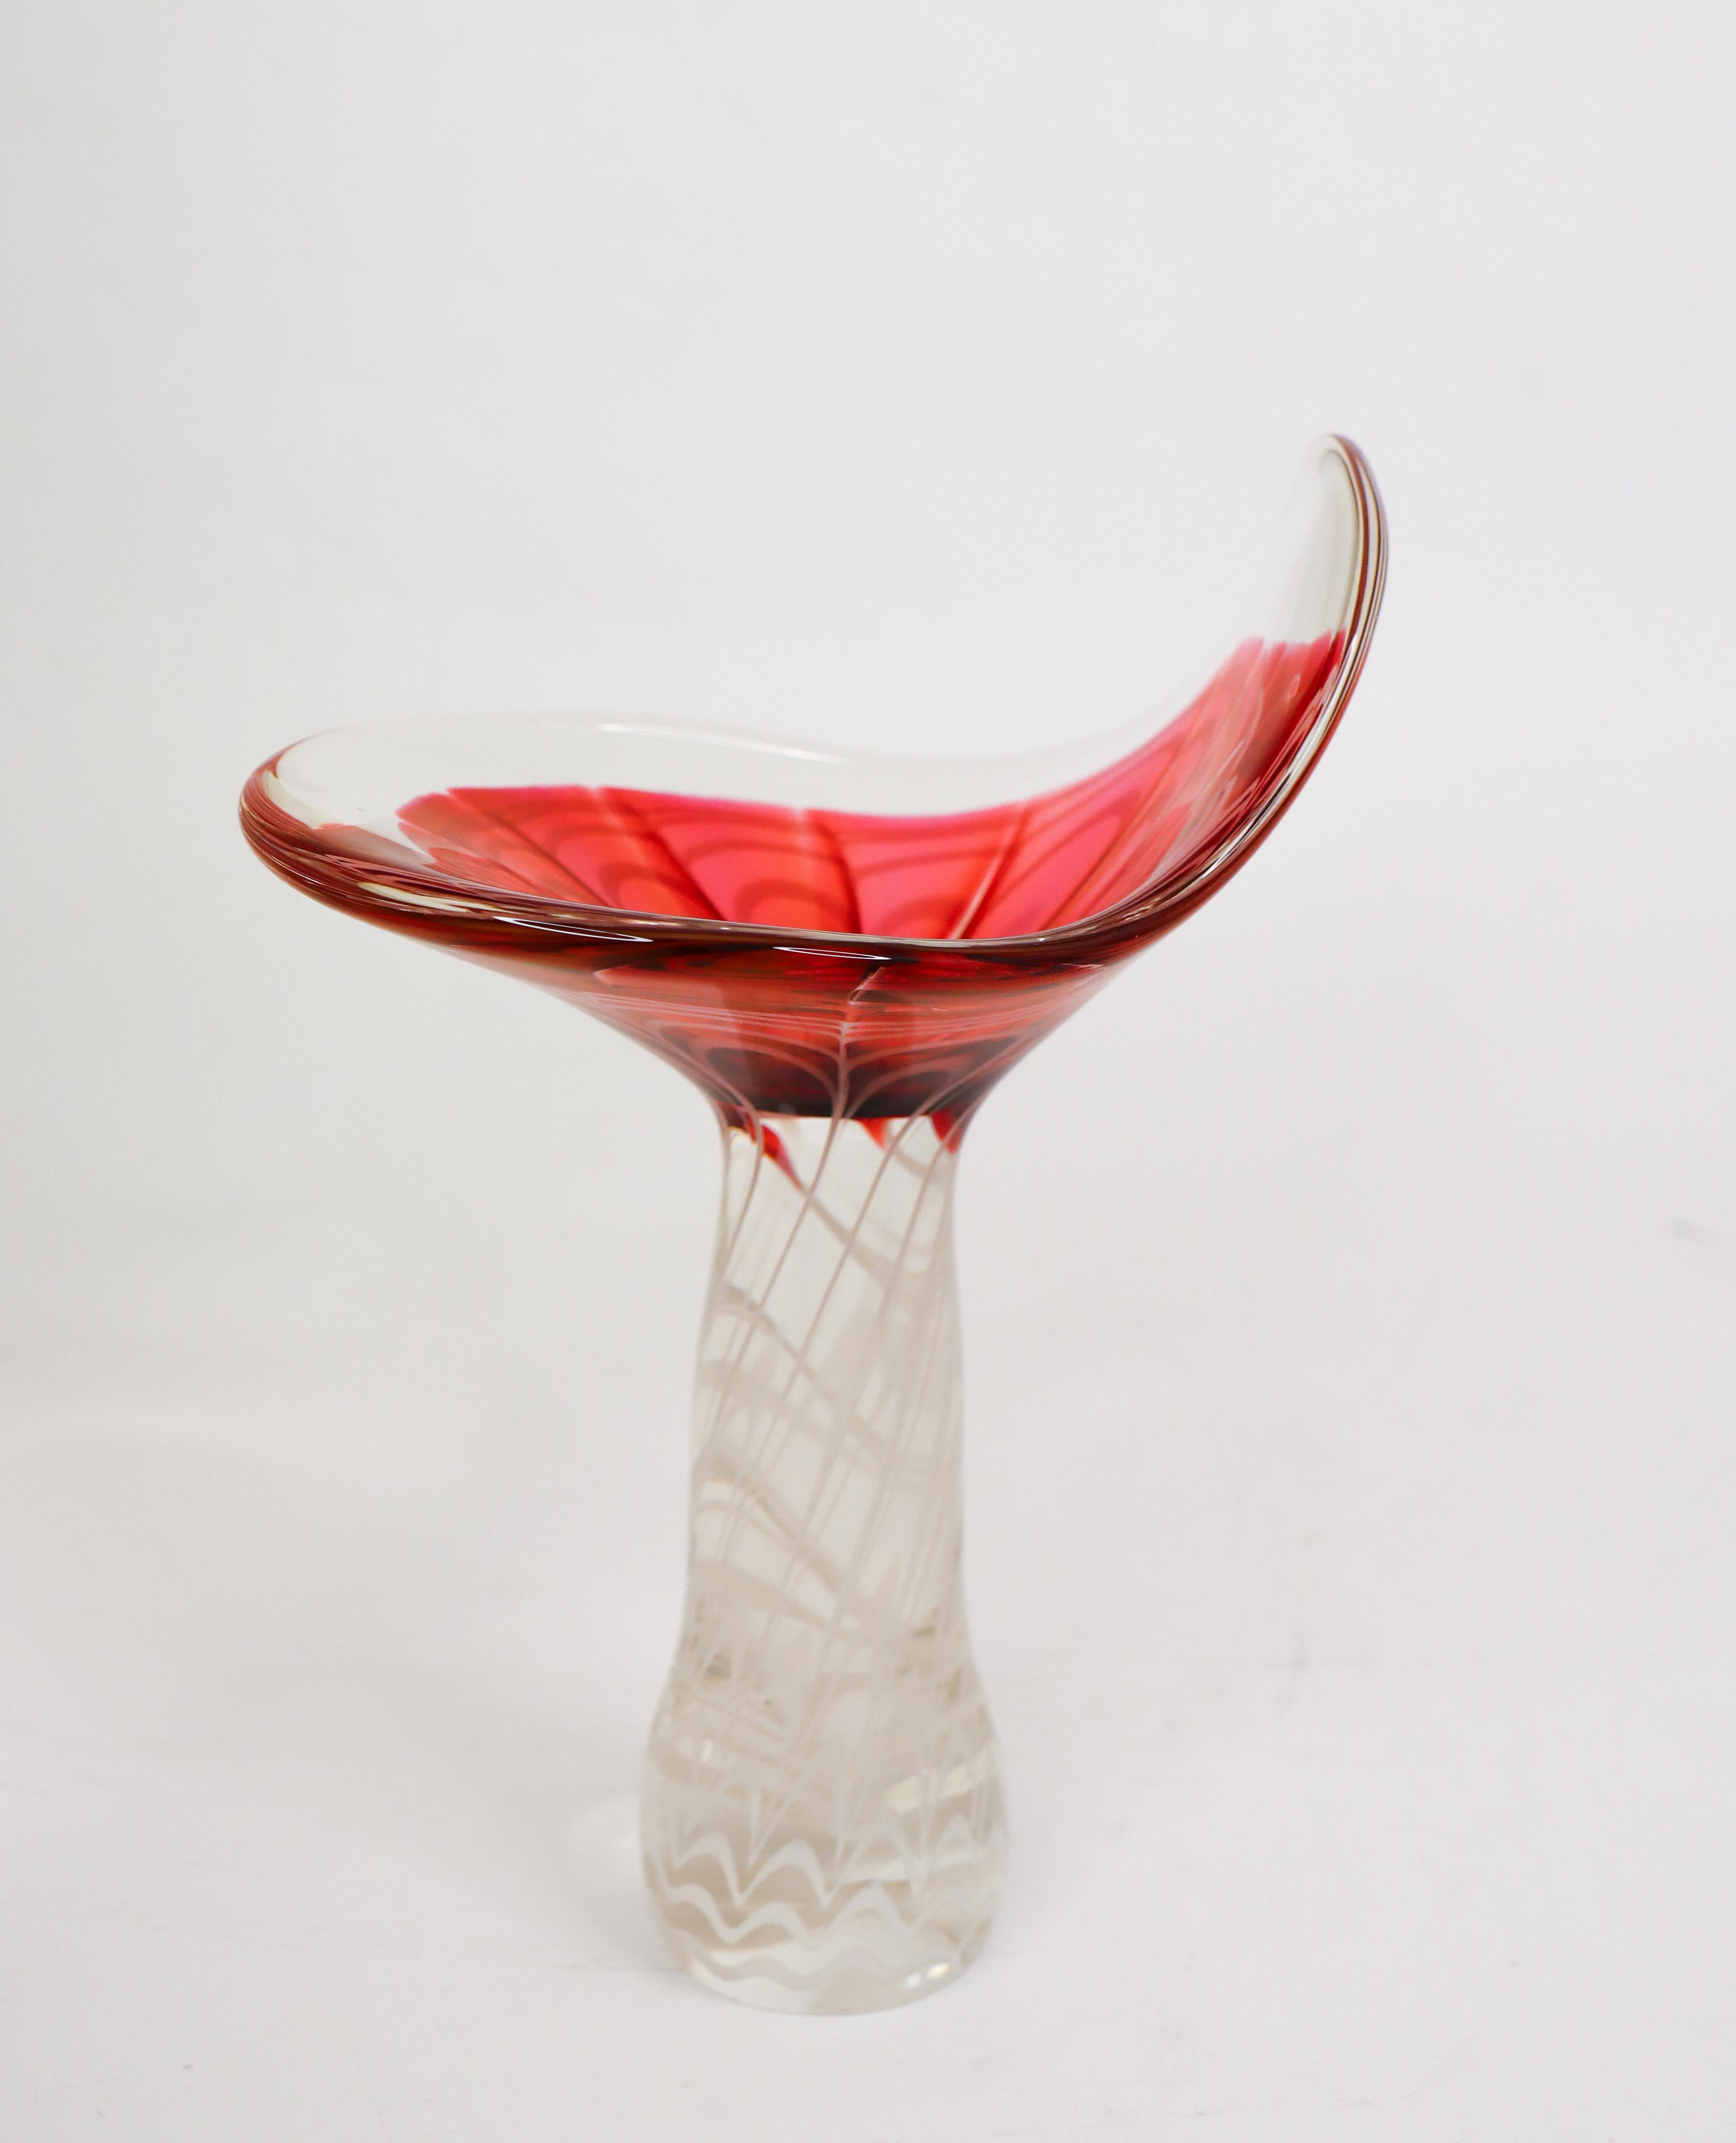 Mid-20th Century Rare Pink Glass Sculpture / Bowl, Flygsfors Paul Kedelv Mid-Century Modern For Sale